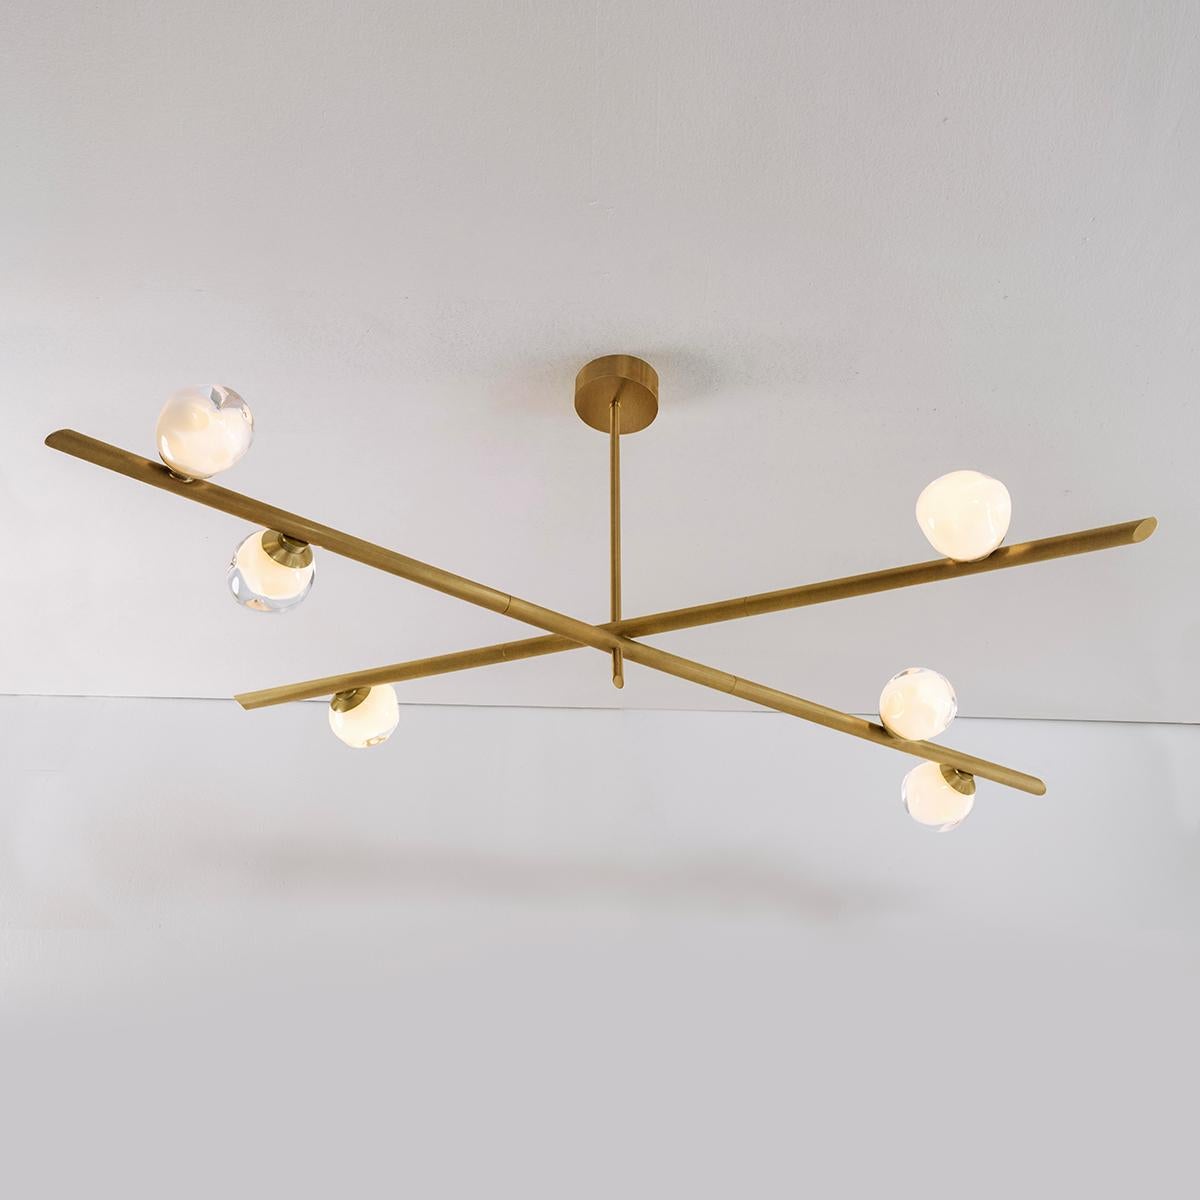 The Antares ceiling light harmoniously balances the linear details of its intersecting arms with the organic form of its handblown glass shades. The first image shows the fixture in our Bronzo Nuvolato specialty finish-subsequent pictures are in the